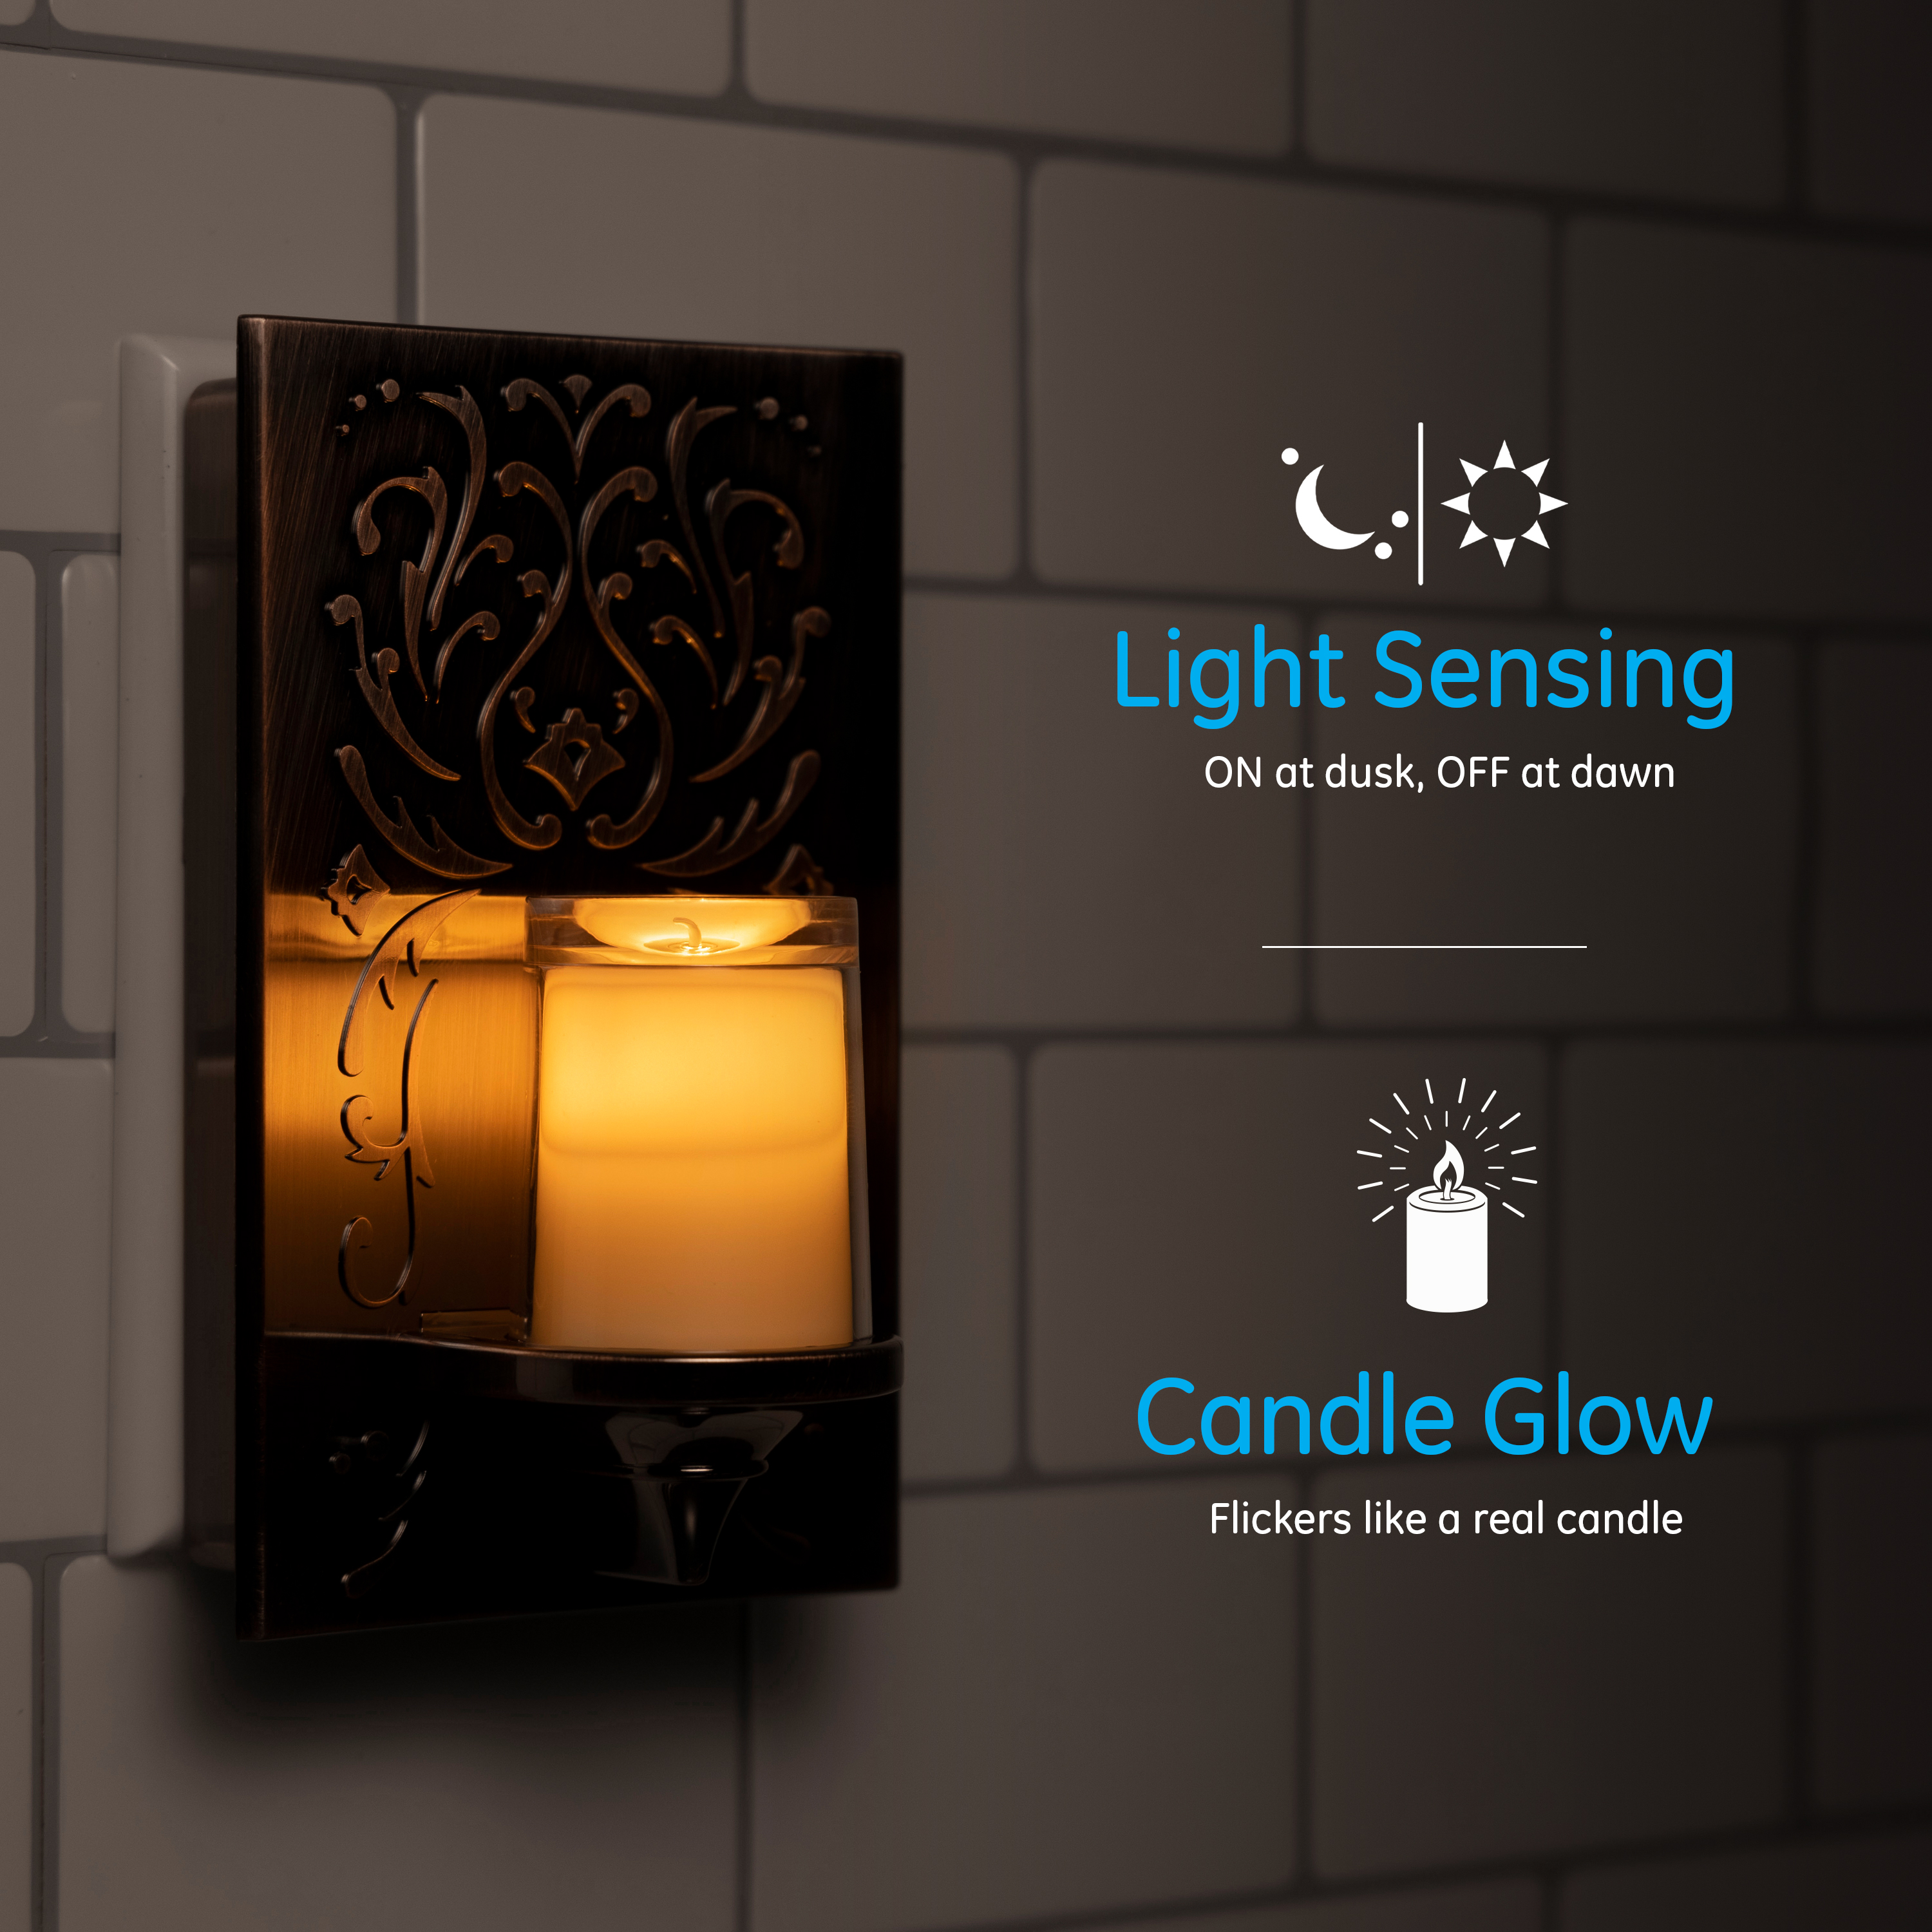 GE CandleLite LED Plug-In Night Light, Flickering Candle Design, Oil Rubbed Bronze, 11258 - image 2 of 7